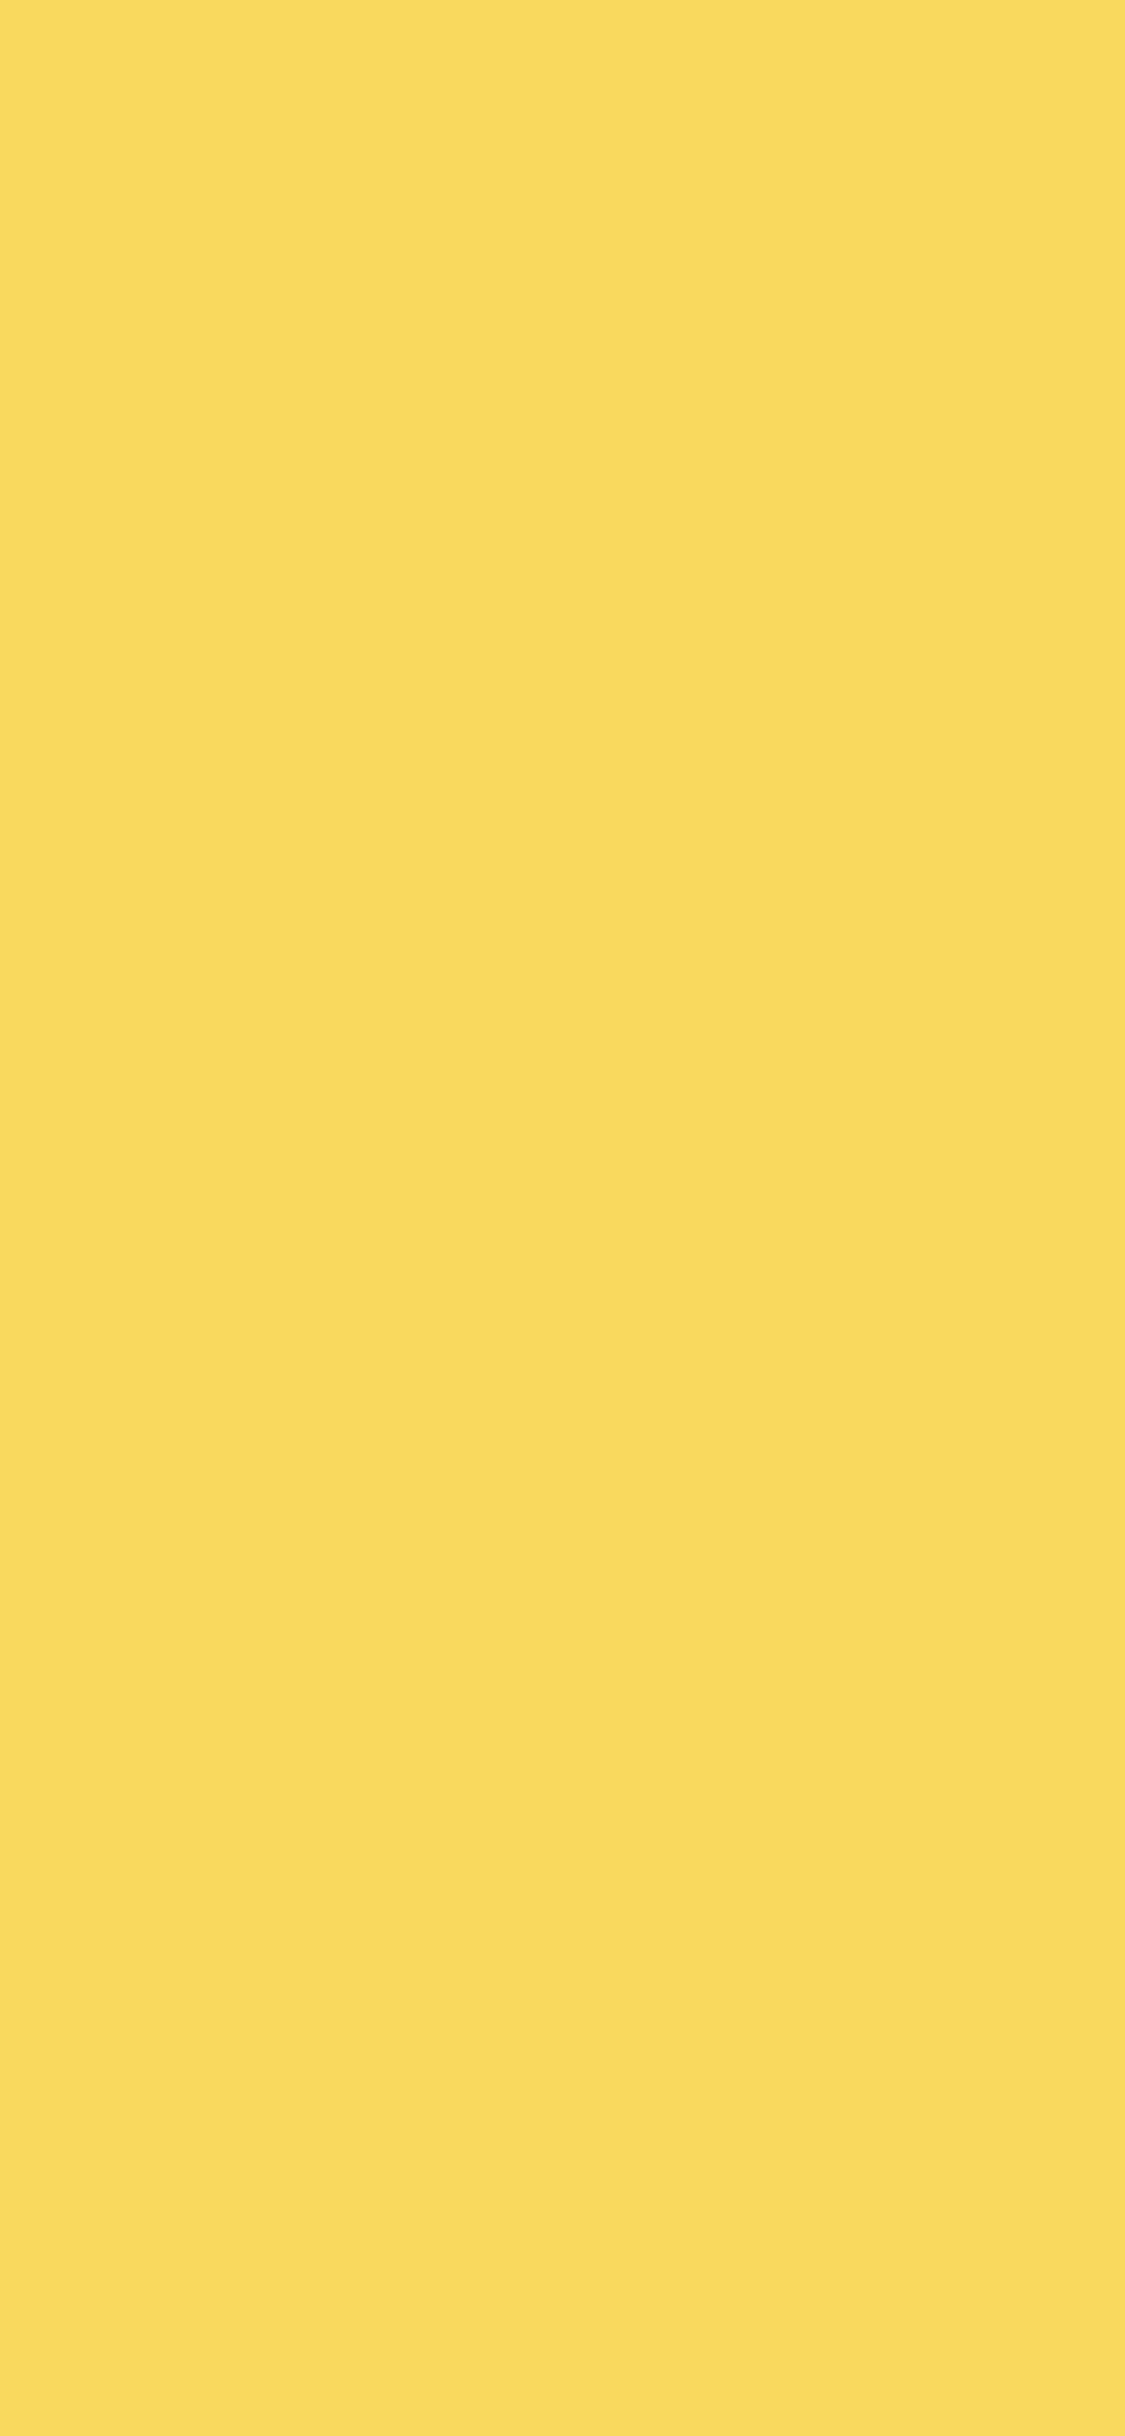 1125x2436 Royal Yellow Solid Color Background